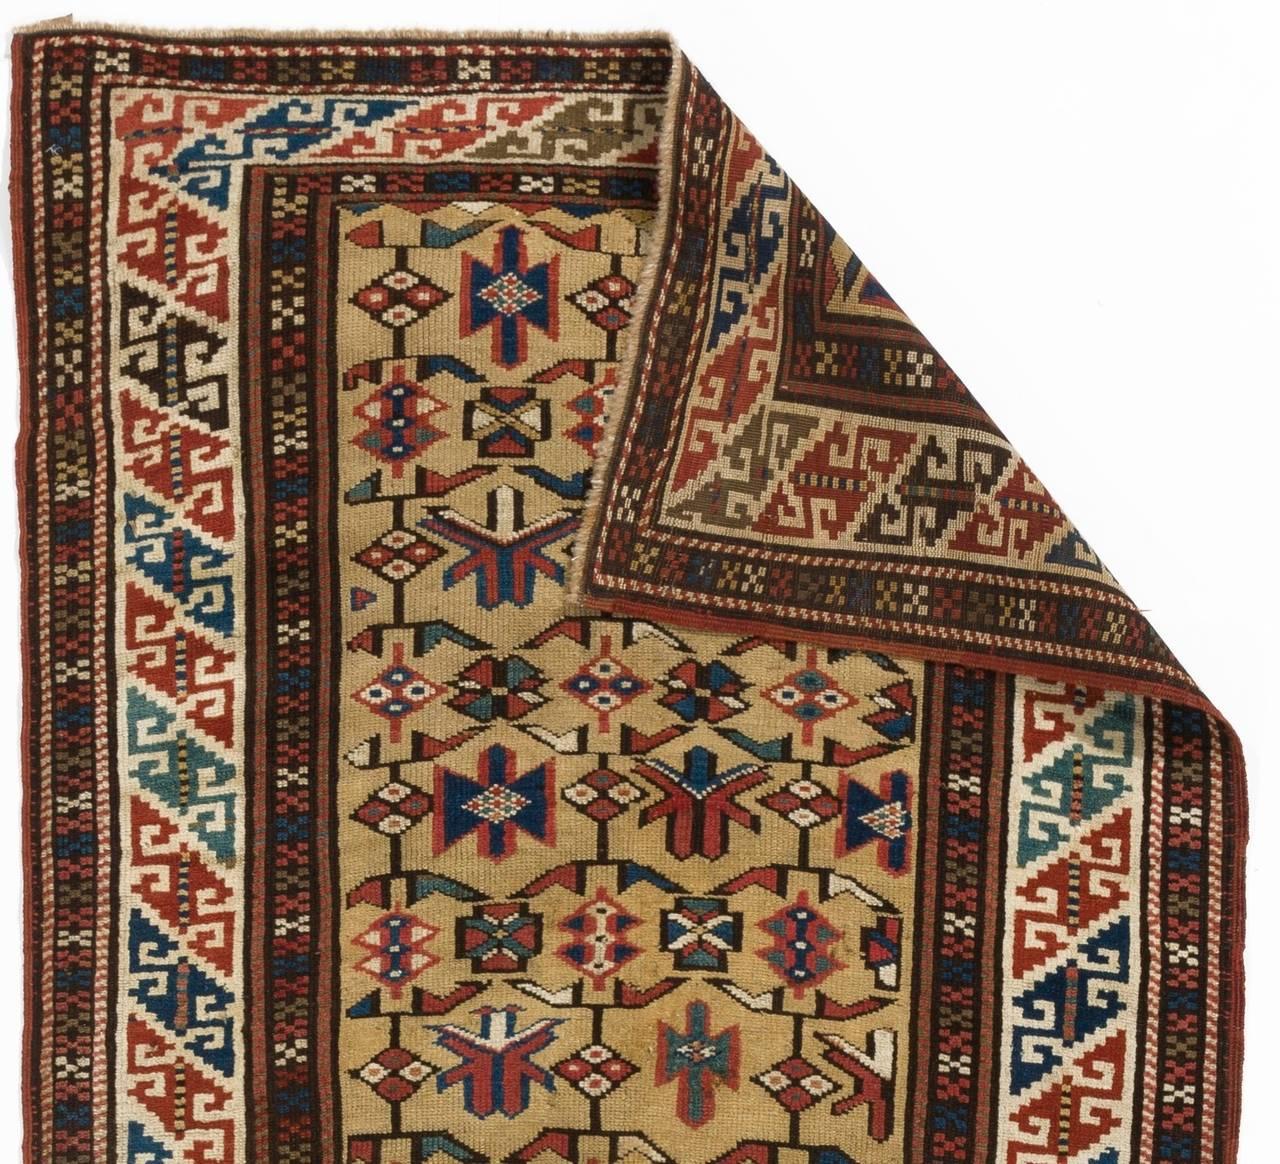 A mid-19th century North East Caucasian rug with a sought after yellow field and beautifully saturated natural dyes. Medium wool pile on wool foundation. Very good condition. Sturdy and as clean as a brand new rug (deep washed professionally).
Size: